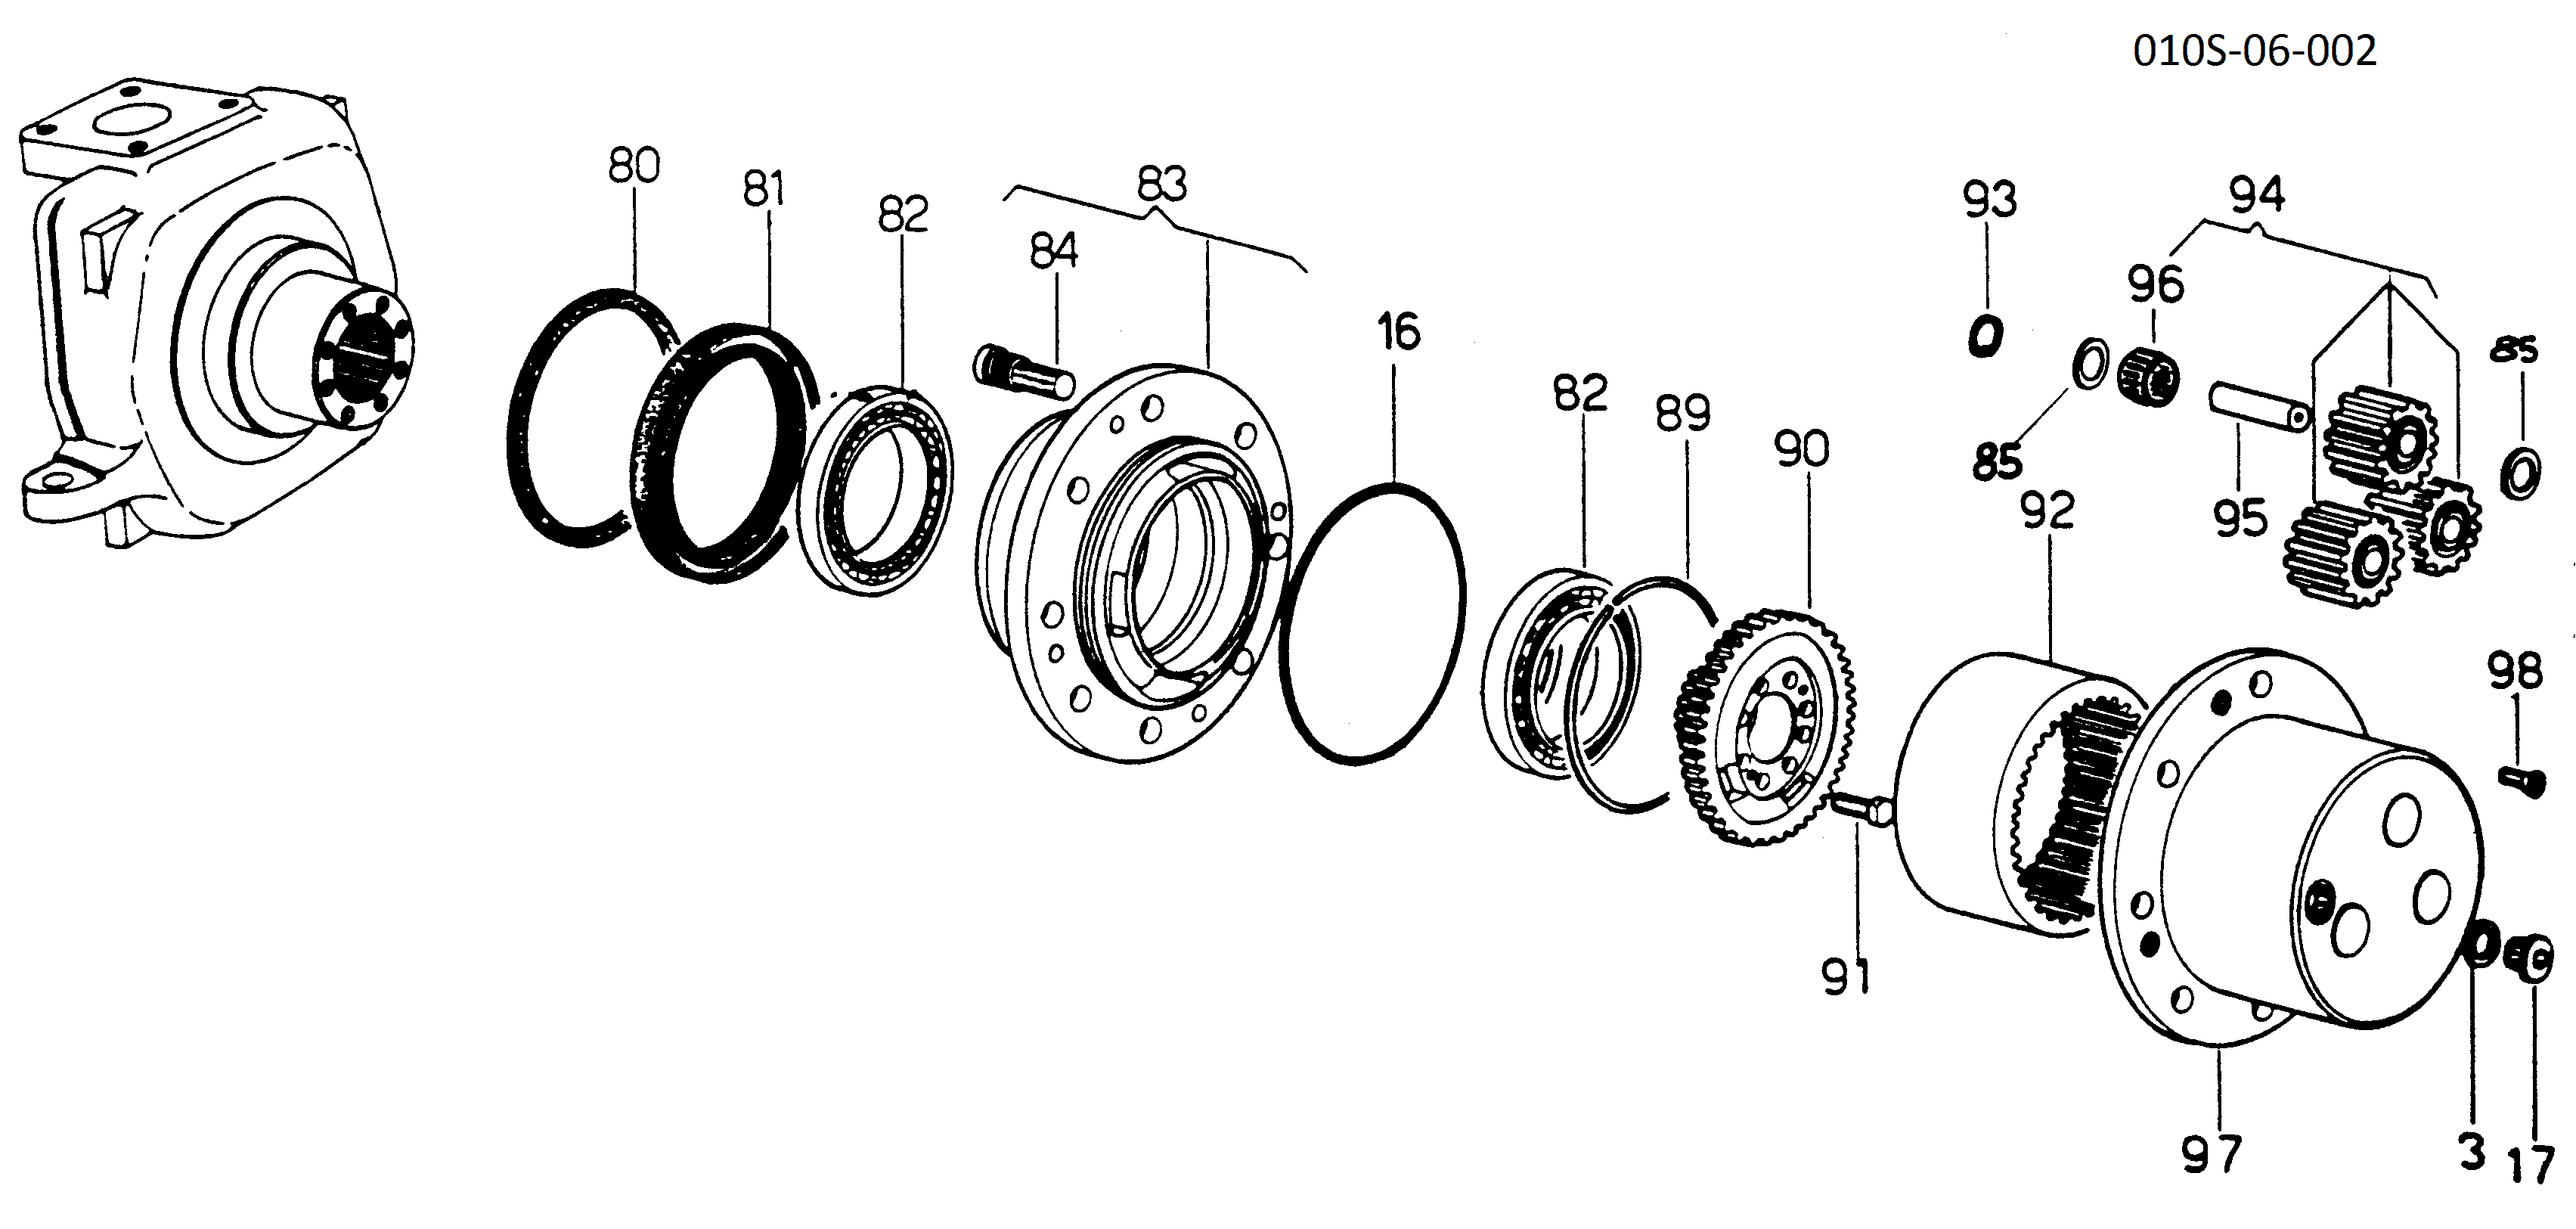 drawing for CNH NEW HOLLAND 1-33-741-017 - WHEEL HUB (figure 1)